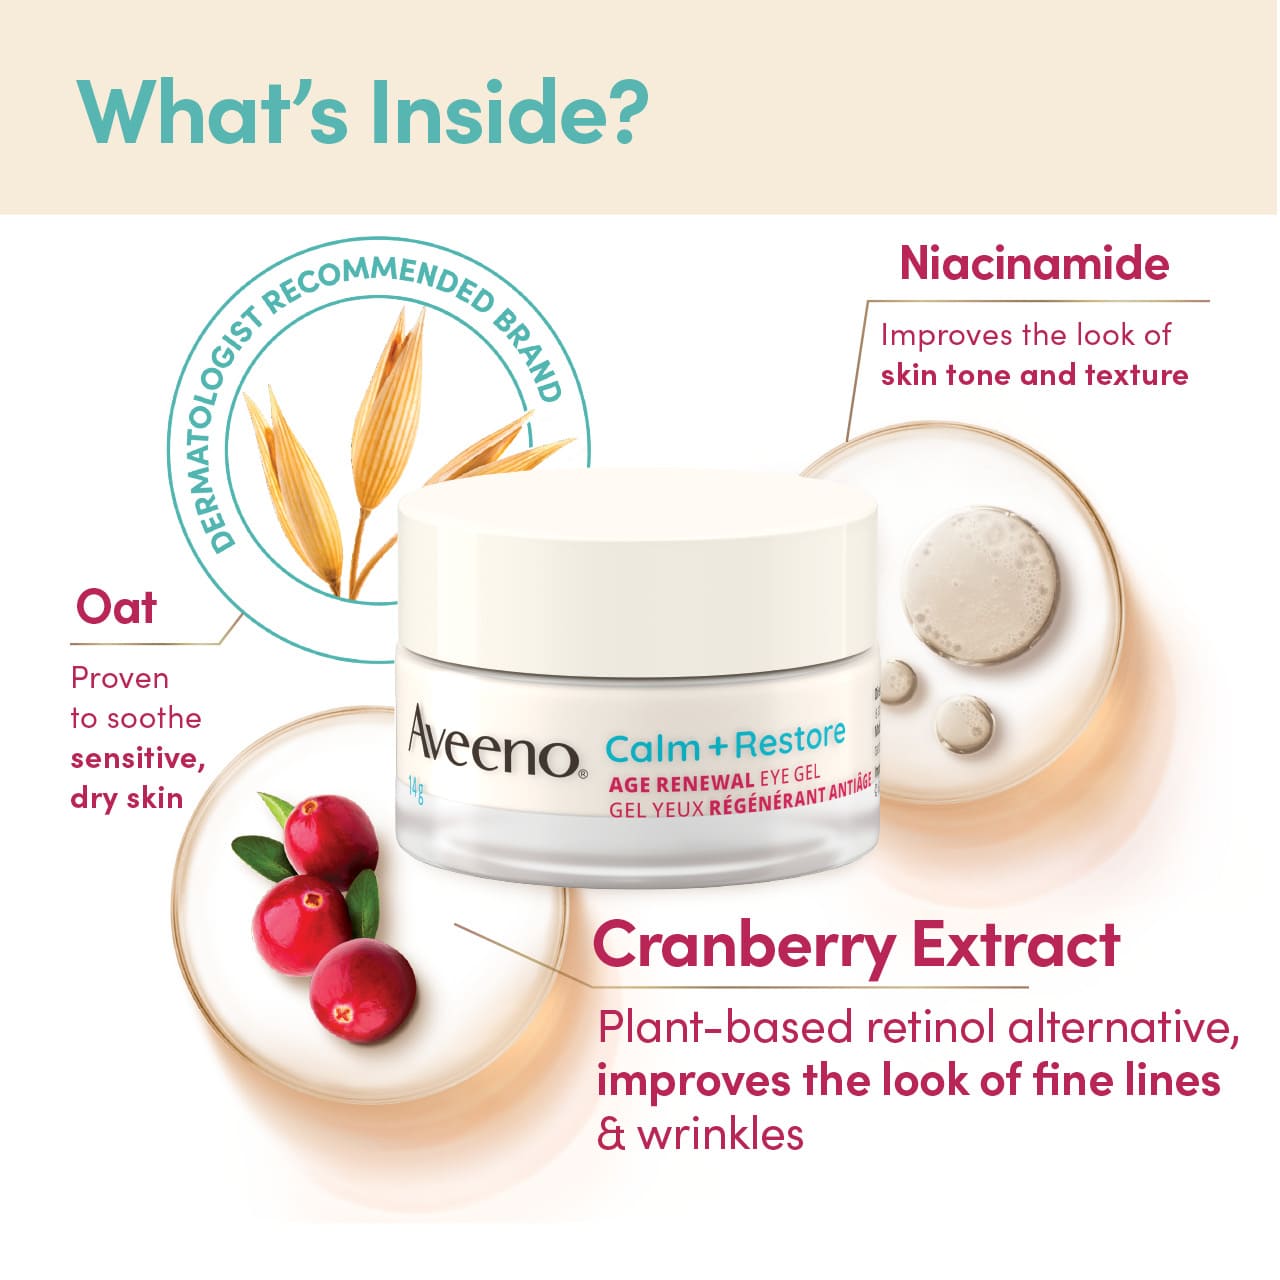 AVEENO® Calm + Restore Age Renewal Eye Gel, glass jar 14 g with ingredients; oat, niacinamide, cranberry extract and their benefits.